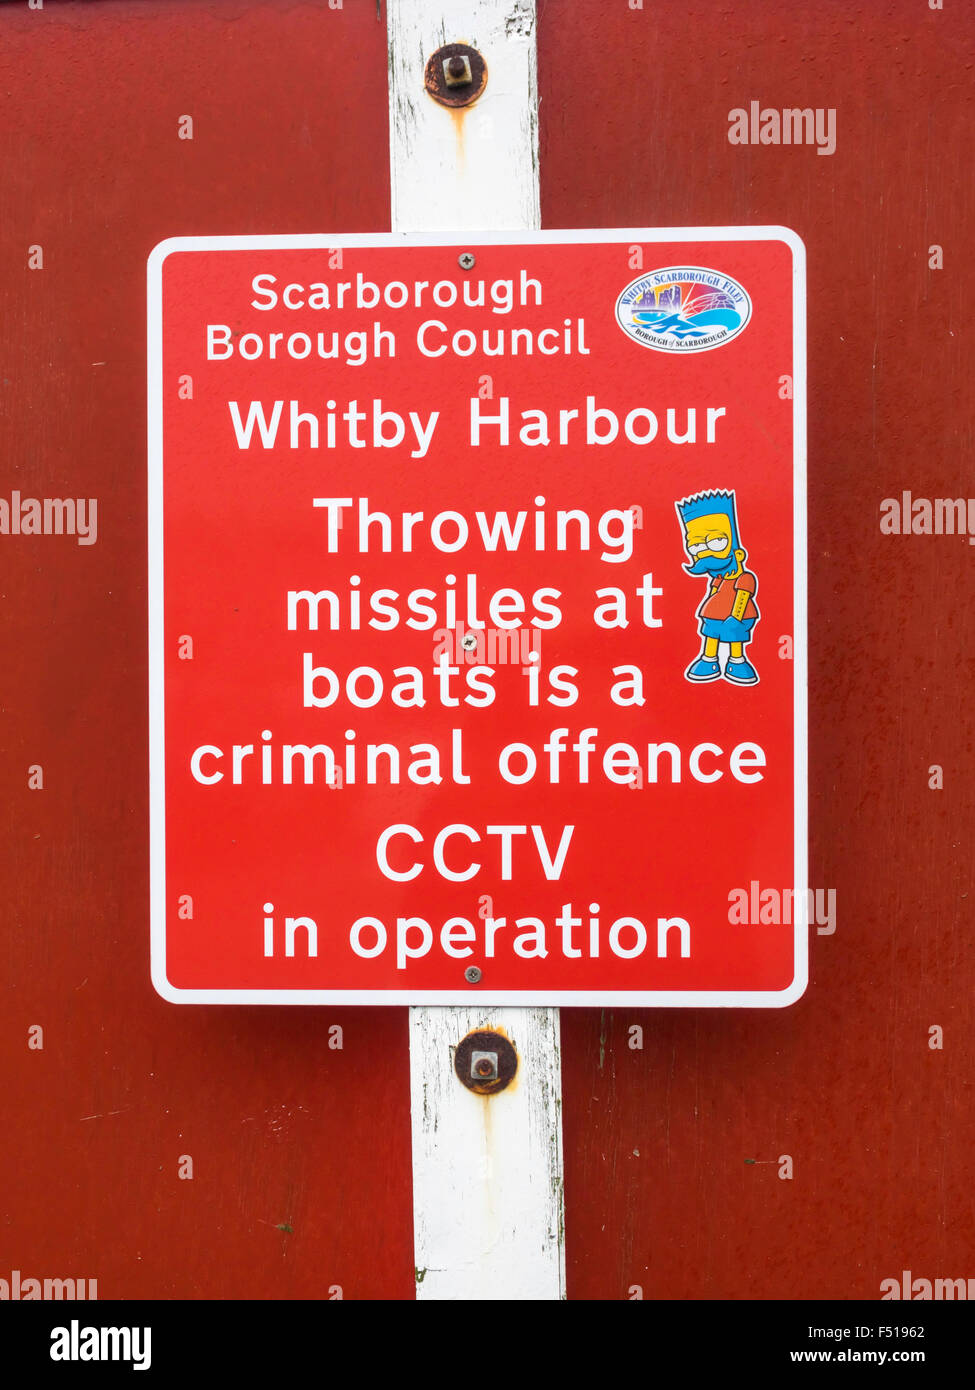 Scarborough Borough Council Warning Sign at Whitby Harbour Throwing Missiles at boats is a criminal offense CCTV in Operation Stock Photo